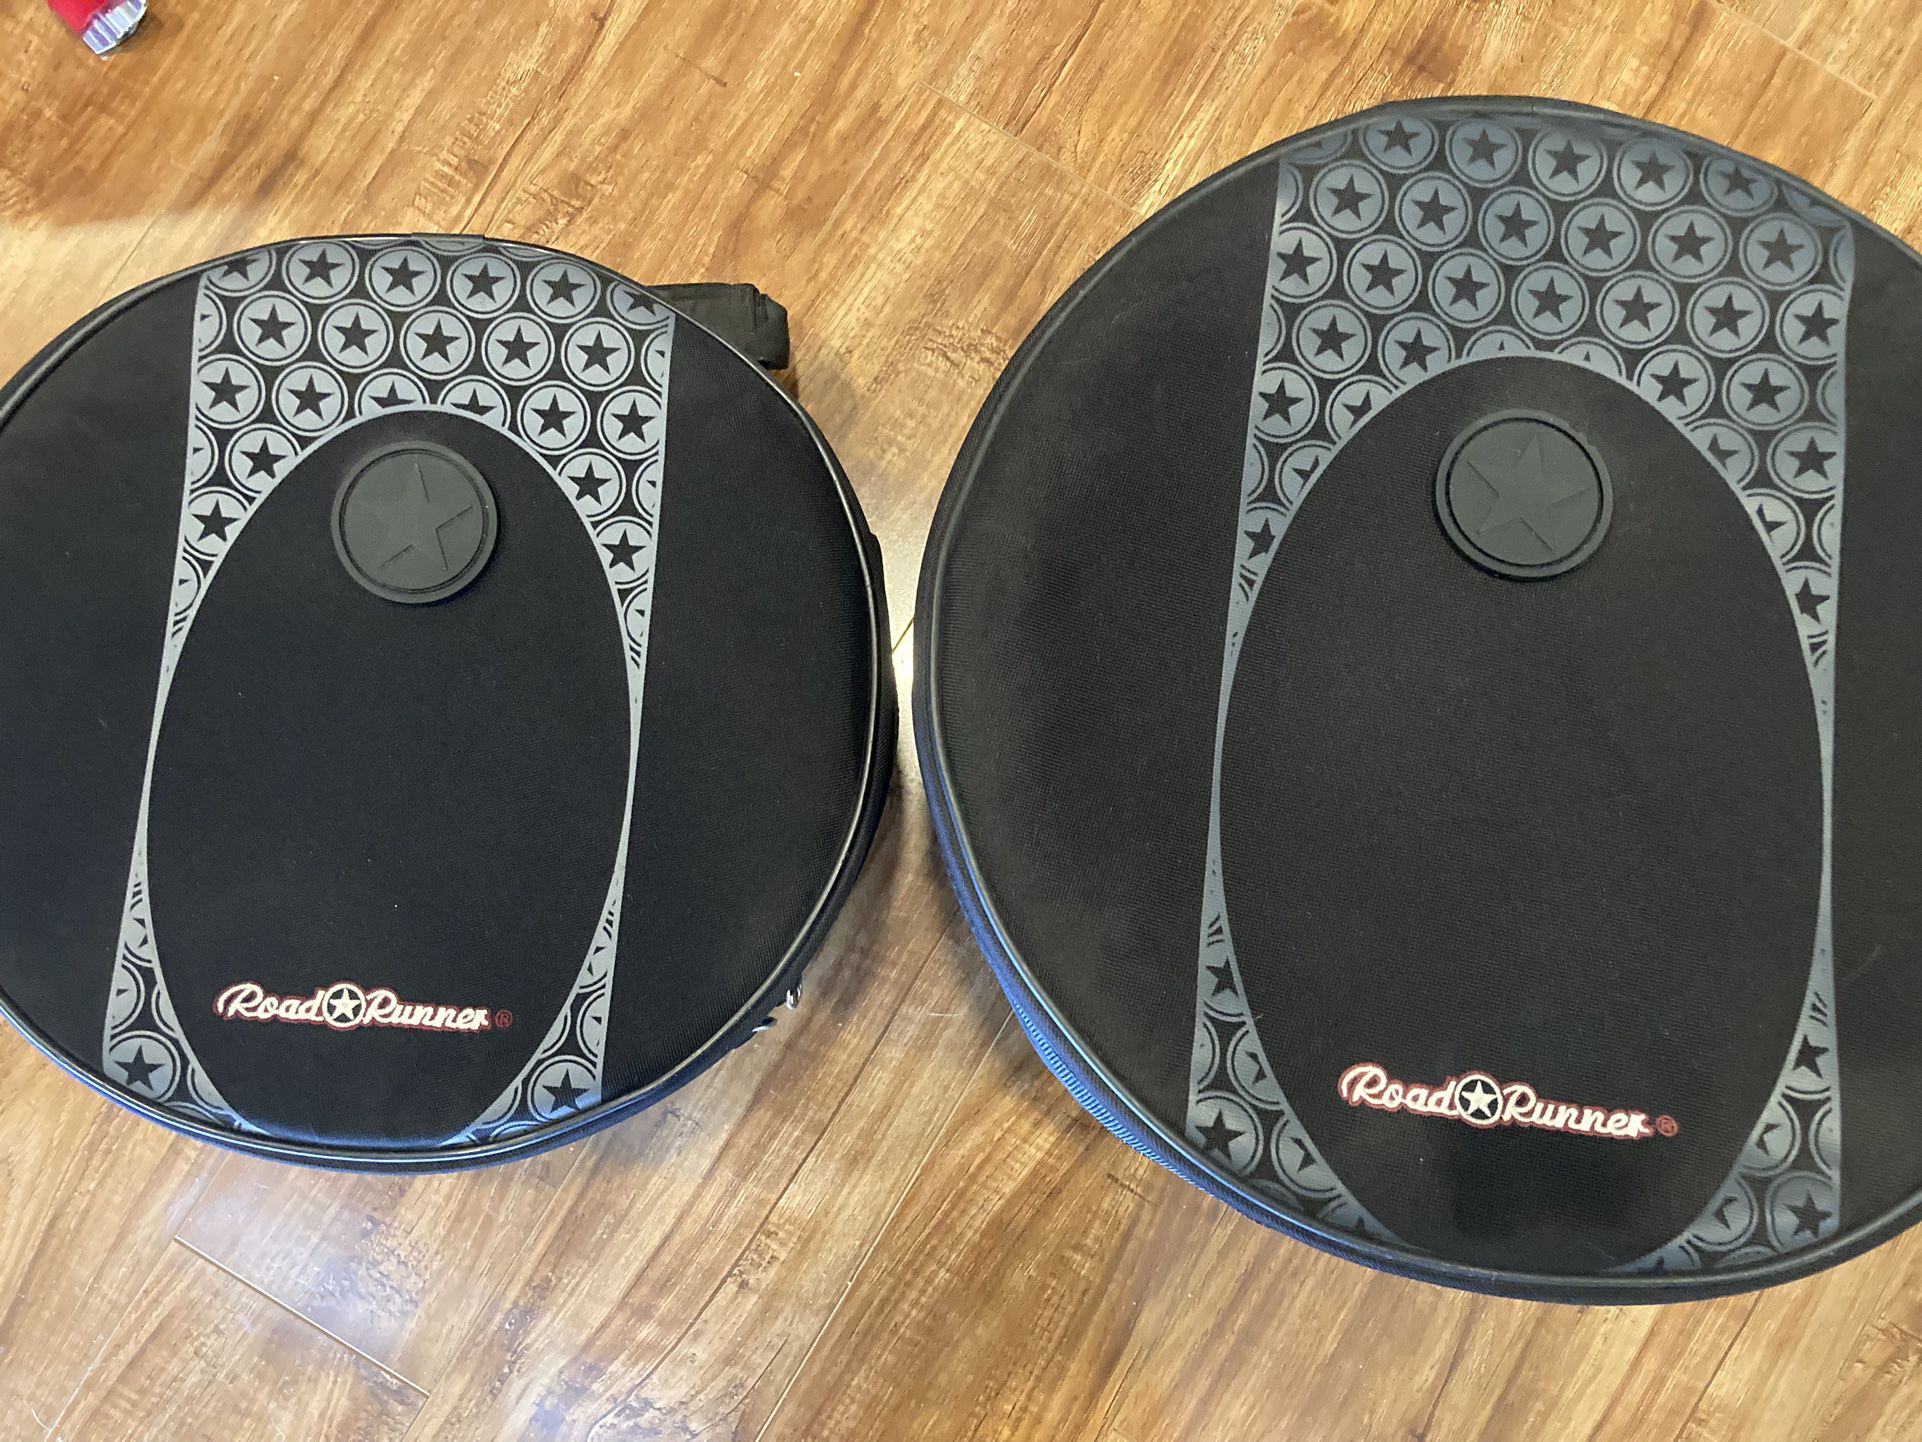 Drum Set Cases 12&13 Mint! 20each Or $30 For Both